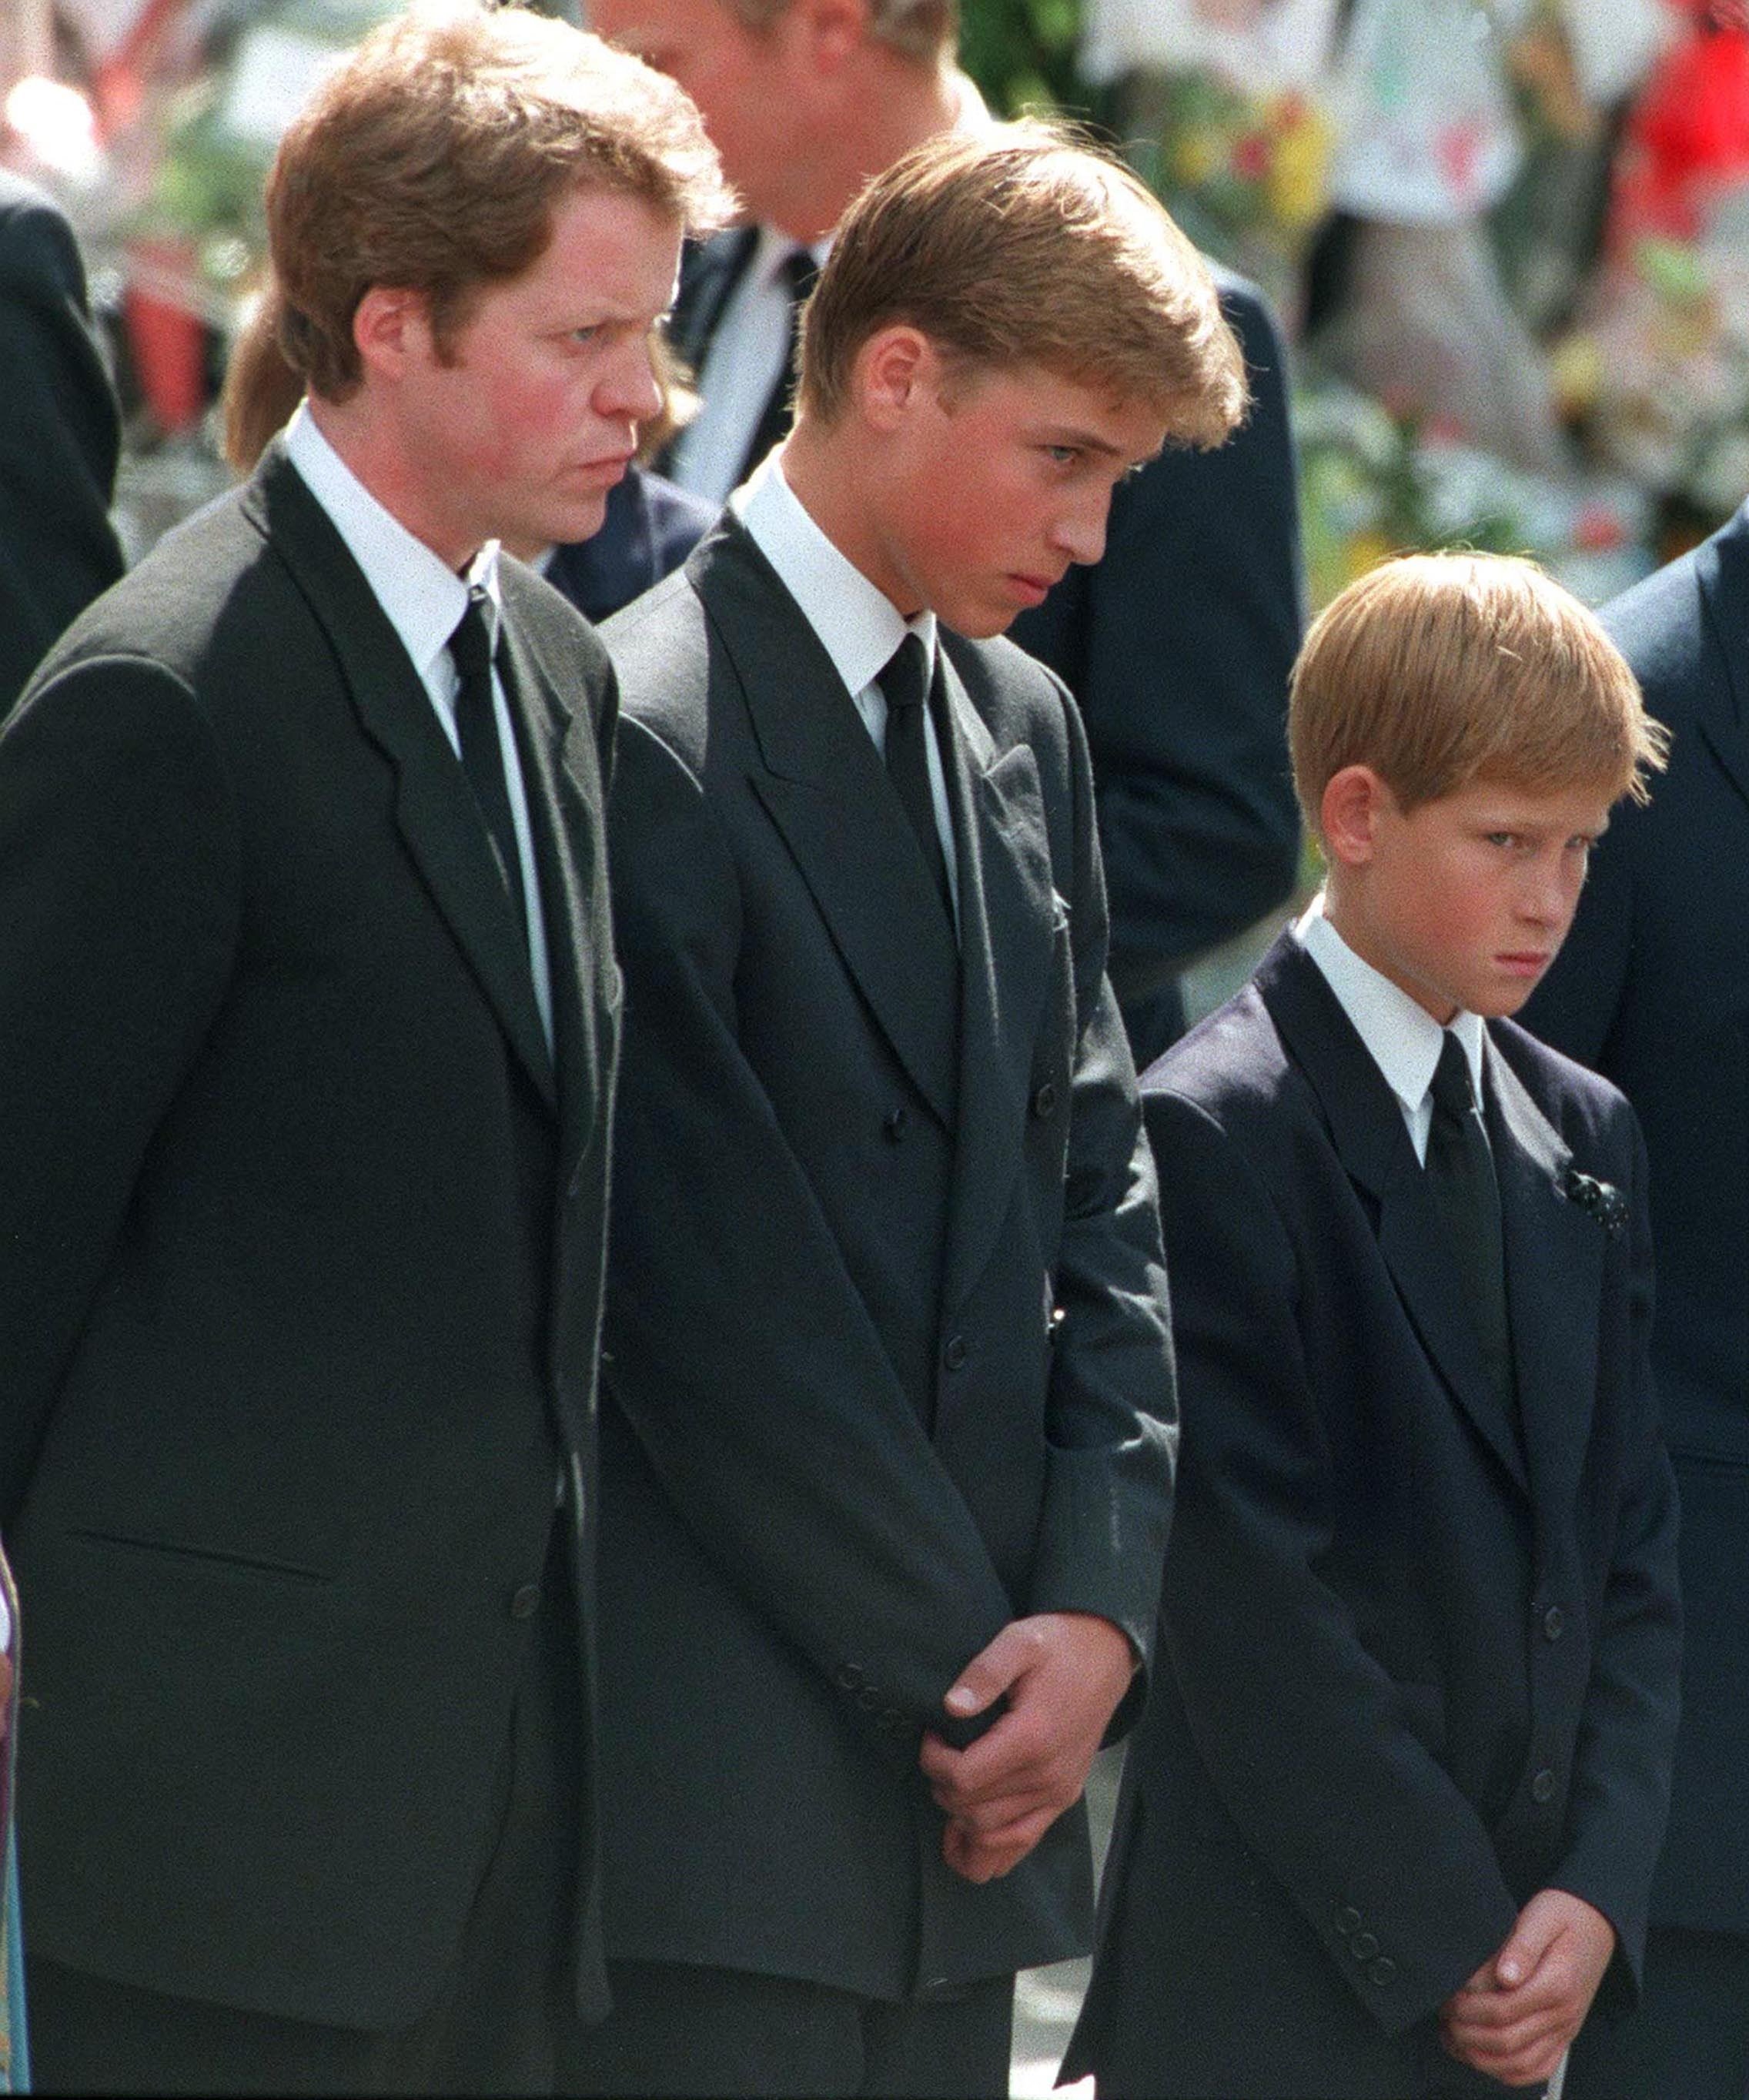 Princes William, Prince Harrys and their uncle Earl Spencer outside Westminster Abbey on the day of Princess Diana's funeral service on September 6, 1997. | Photo: Getty Images